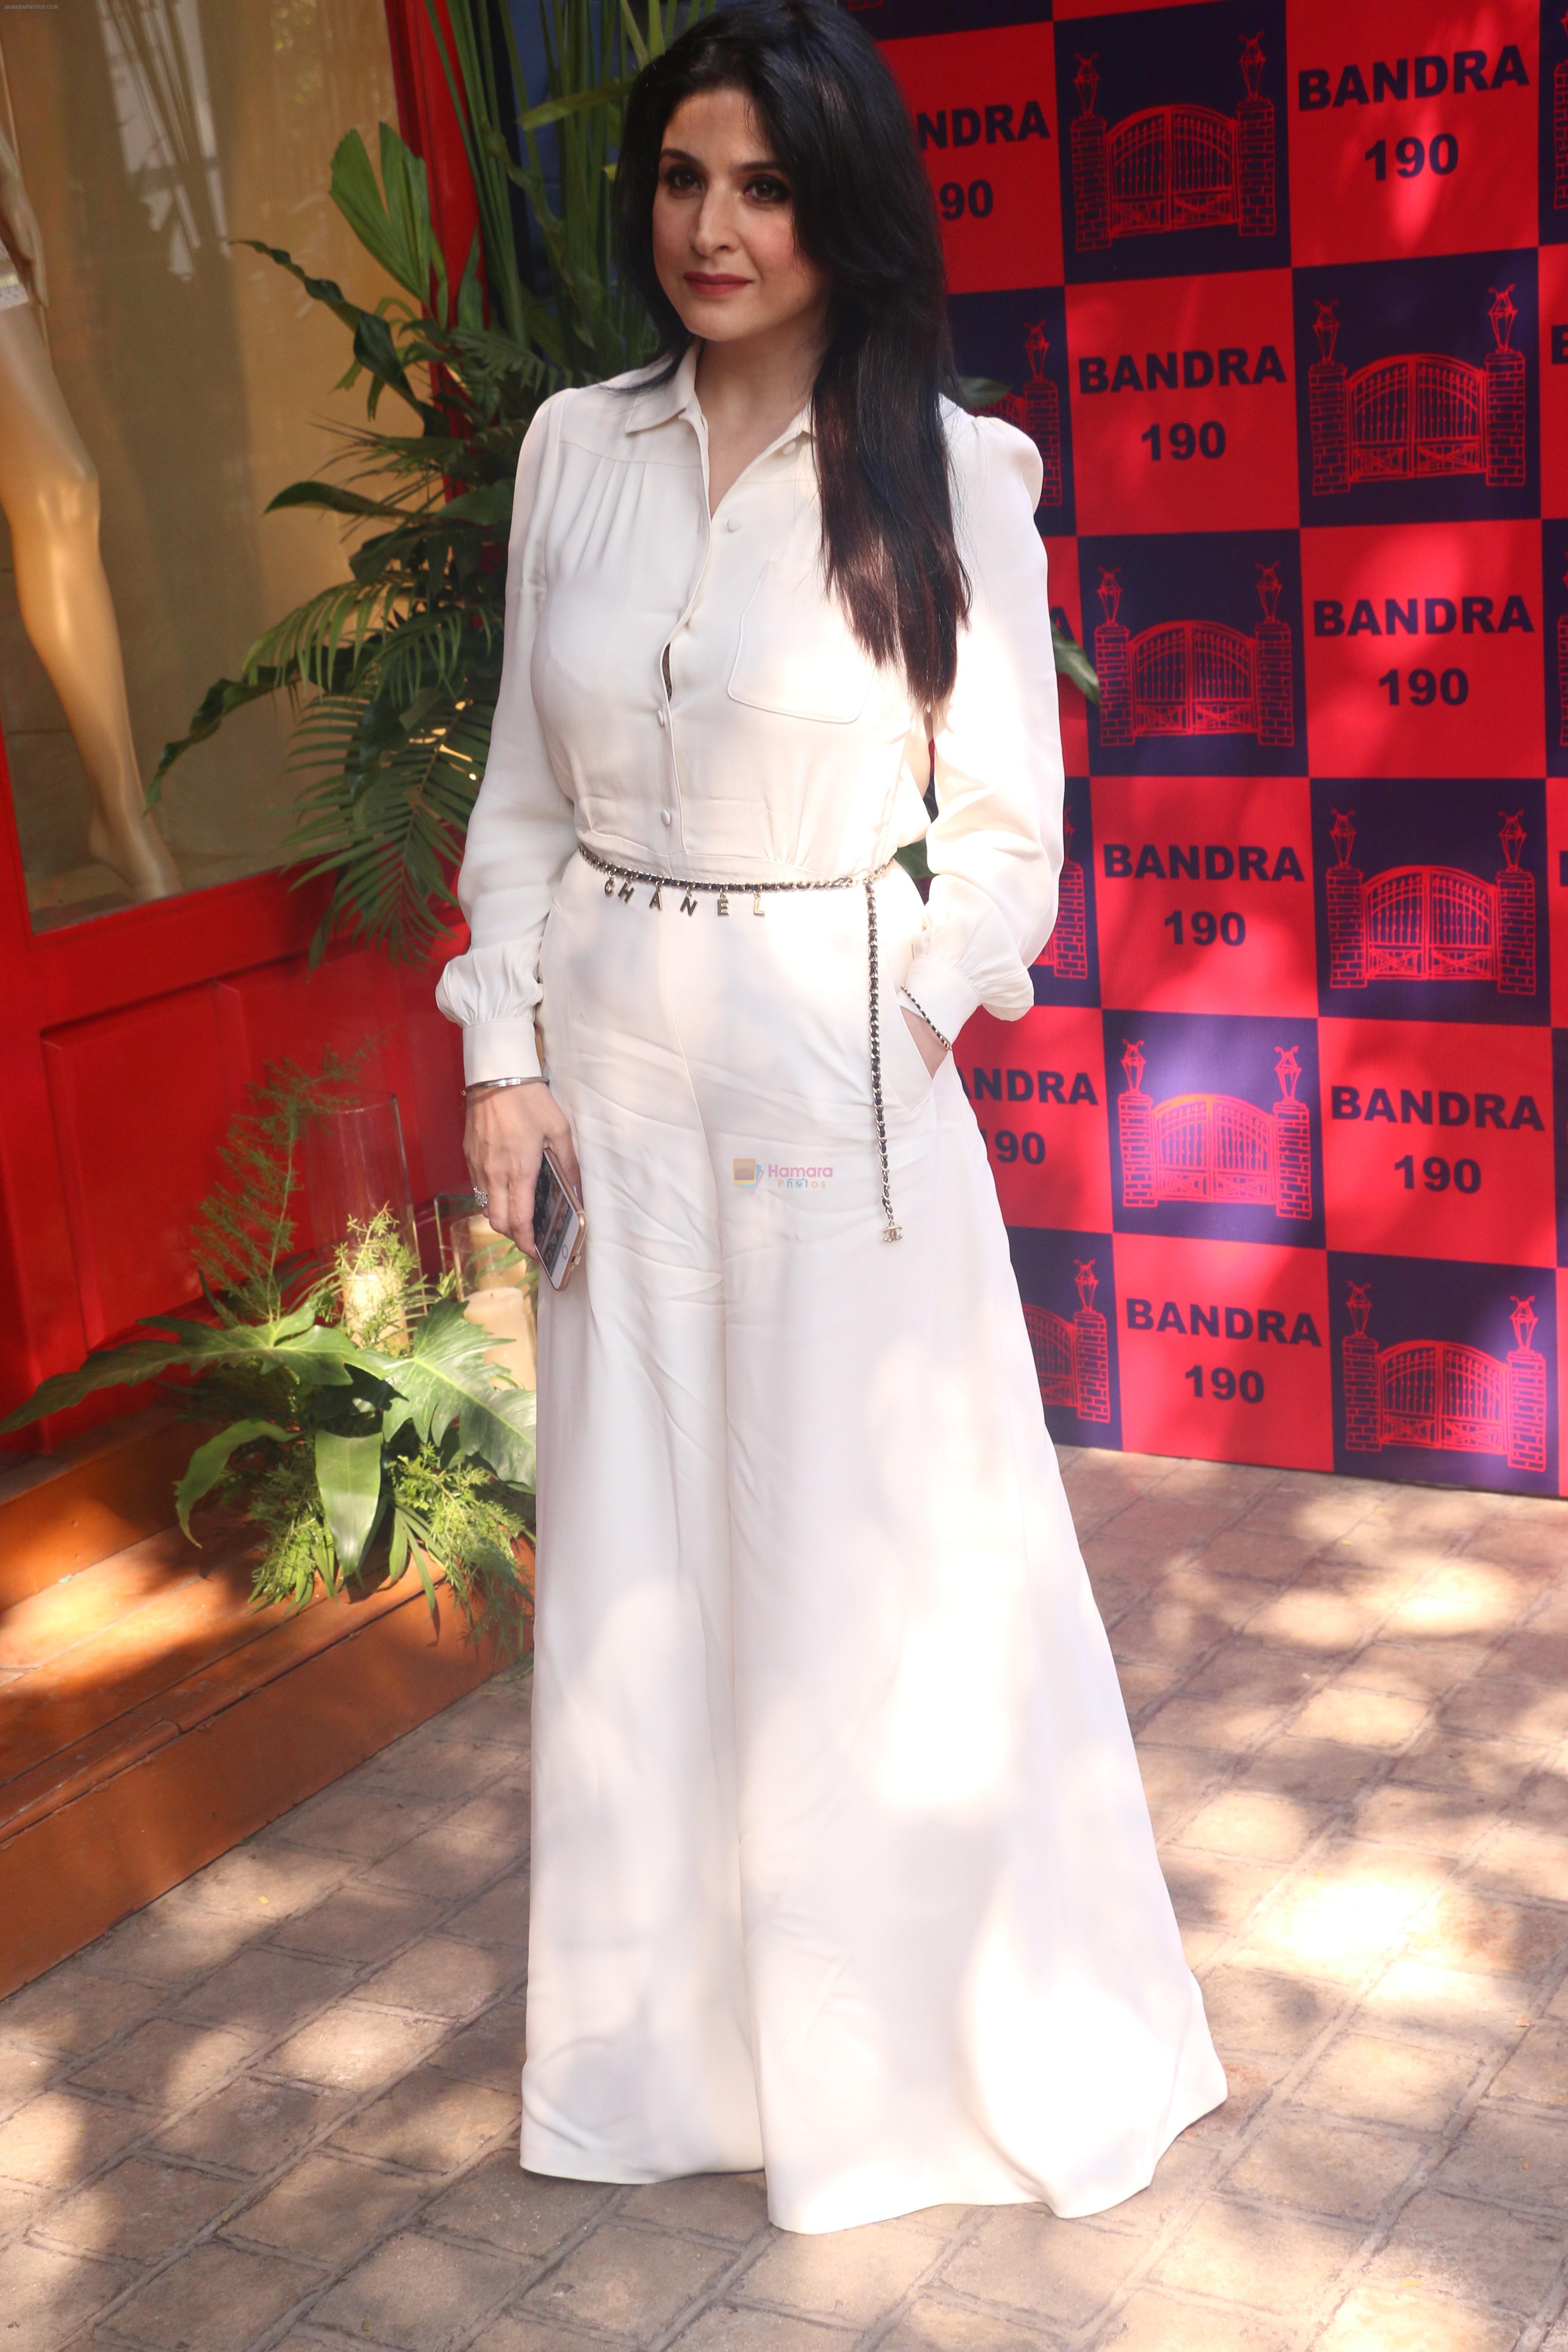 Maheep Kapoor attend a fashion event at Bandra190 on 21st Feb 2019